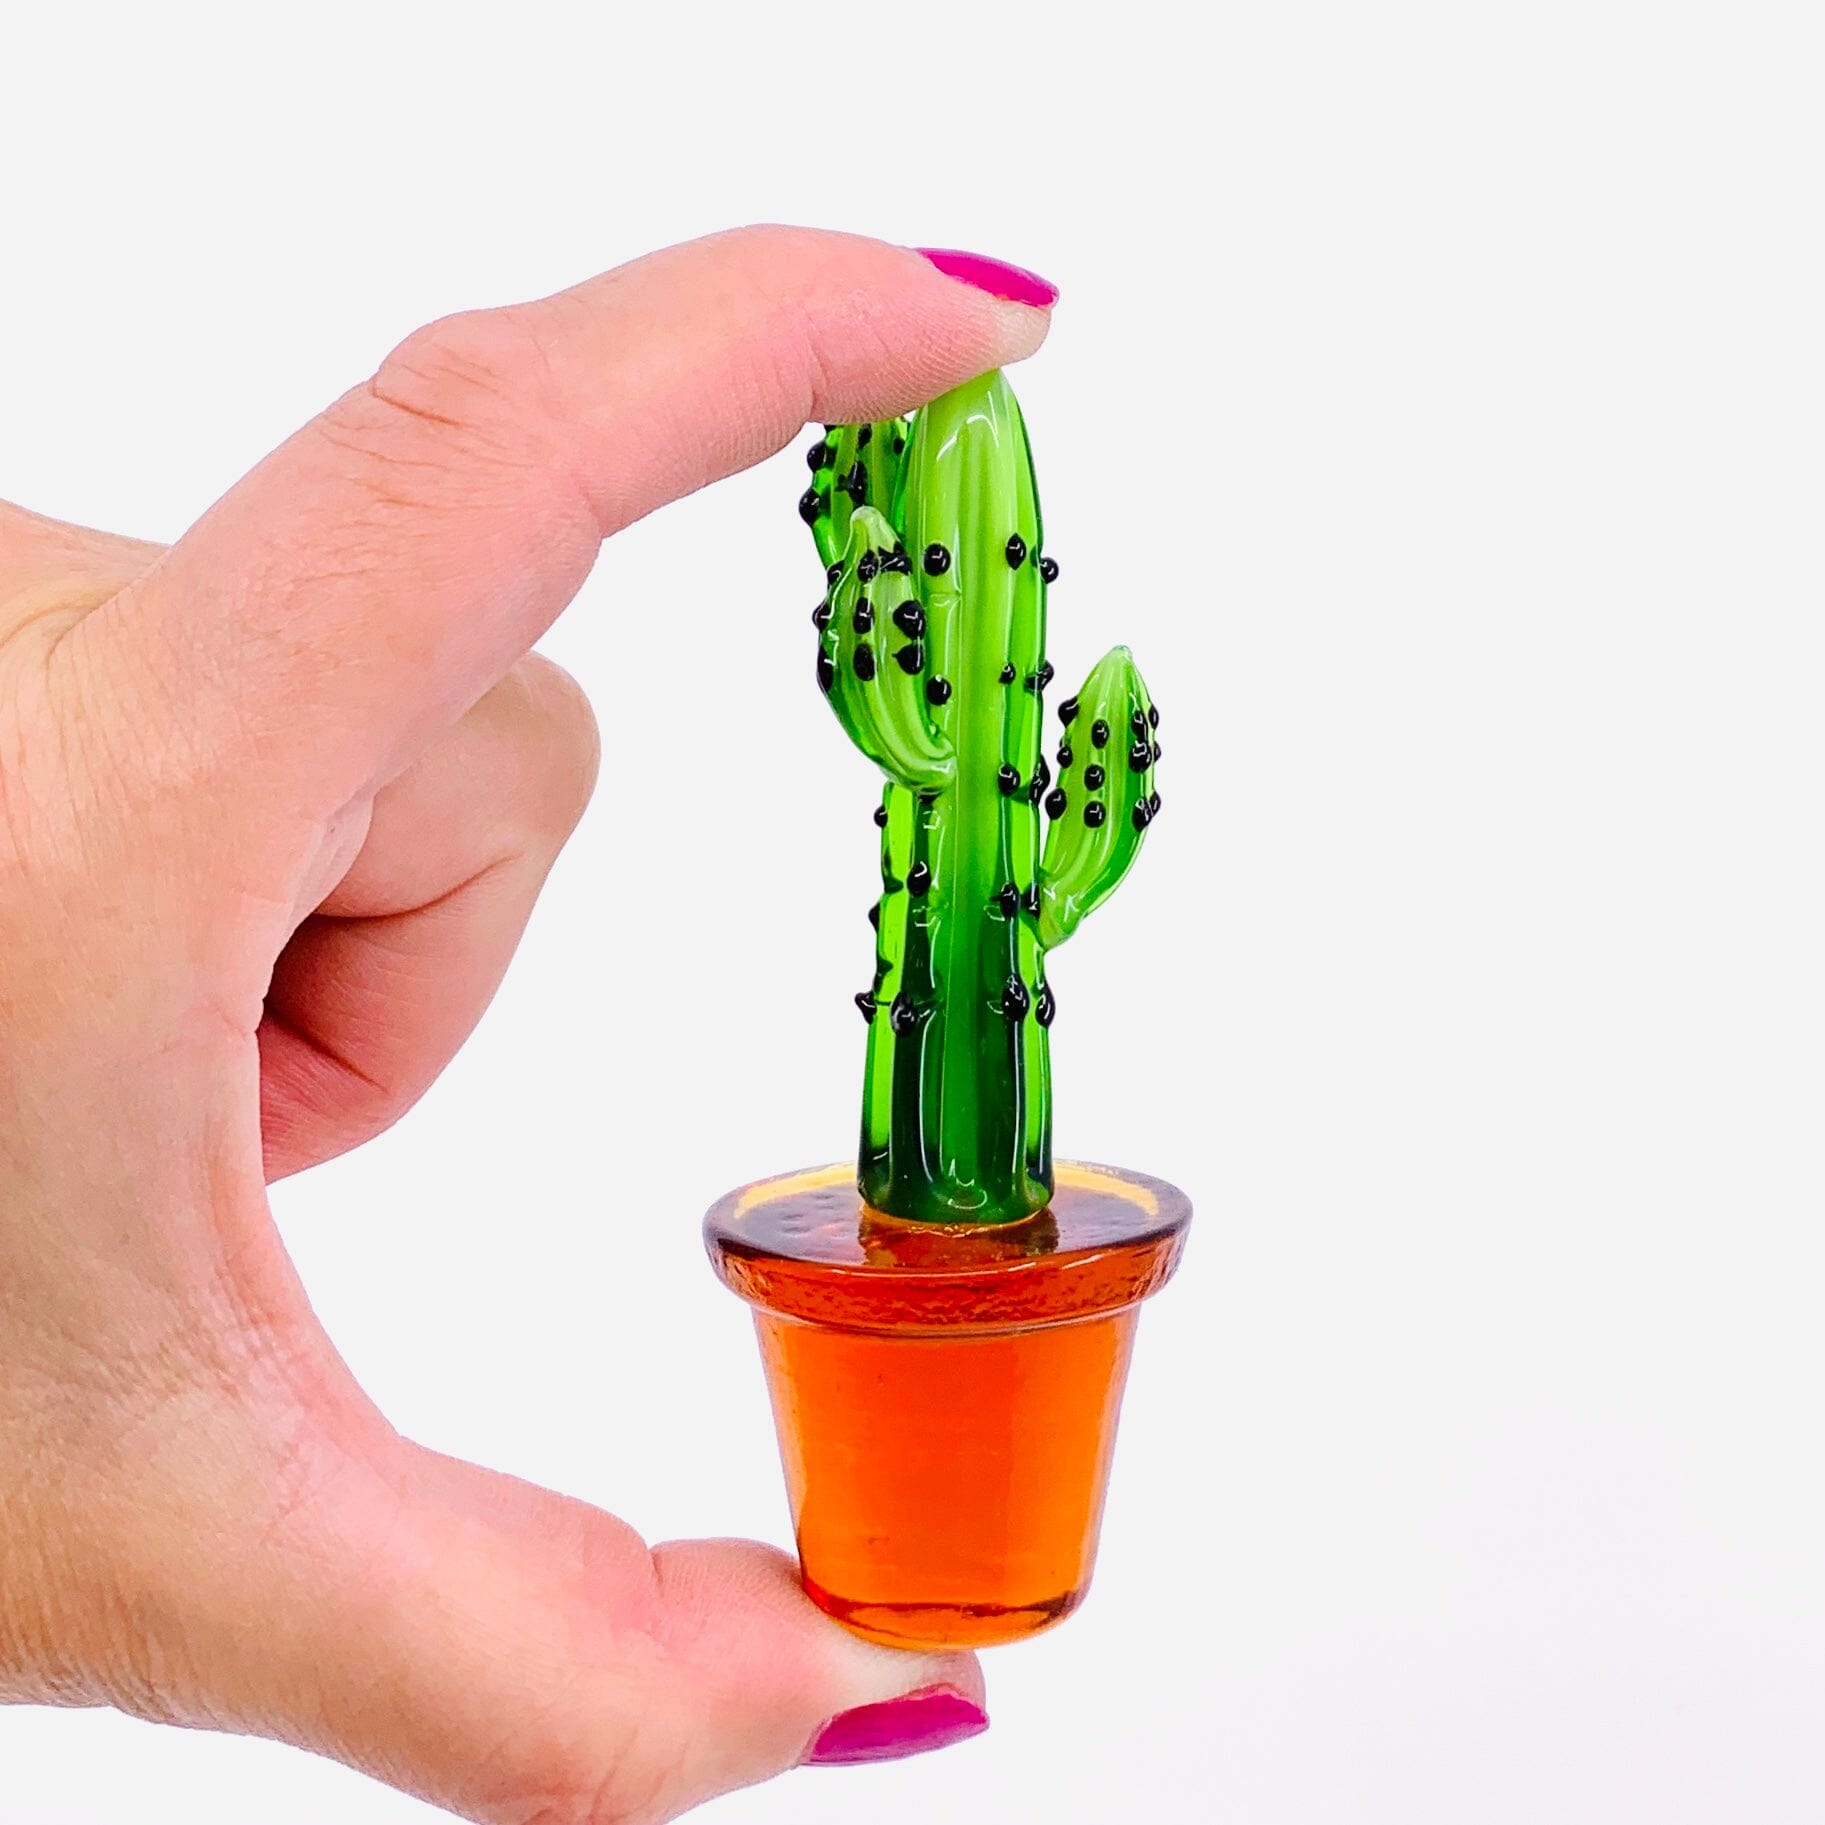 Emotional Support Pocket Cactus, 3 Miniature Dynasty 